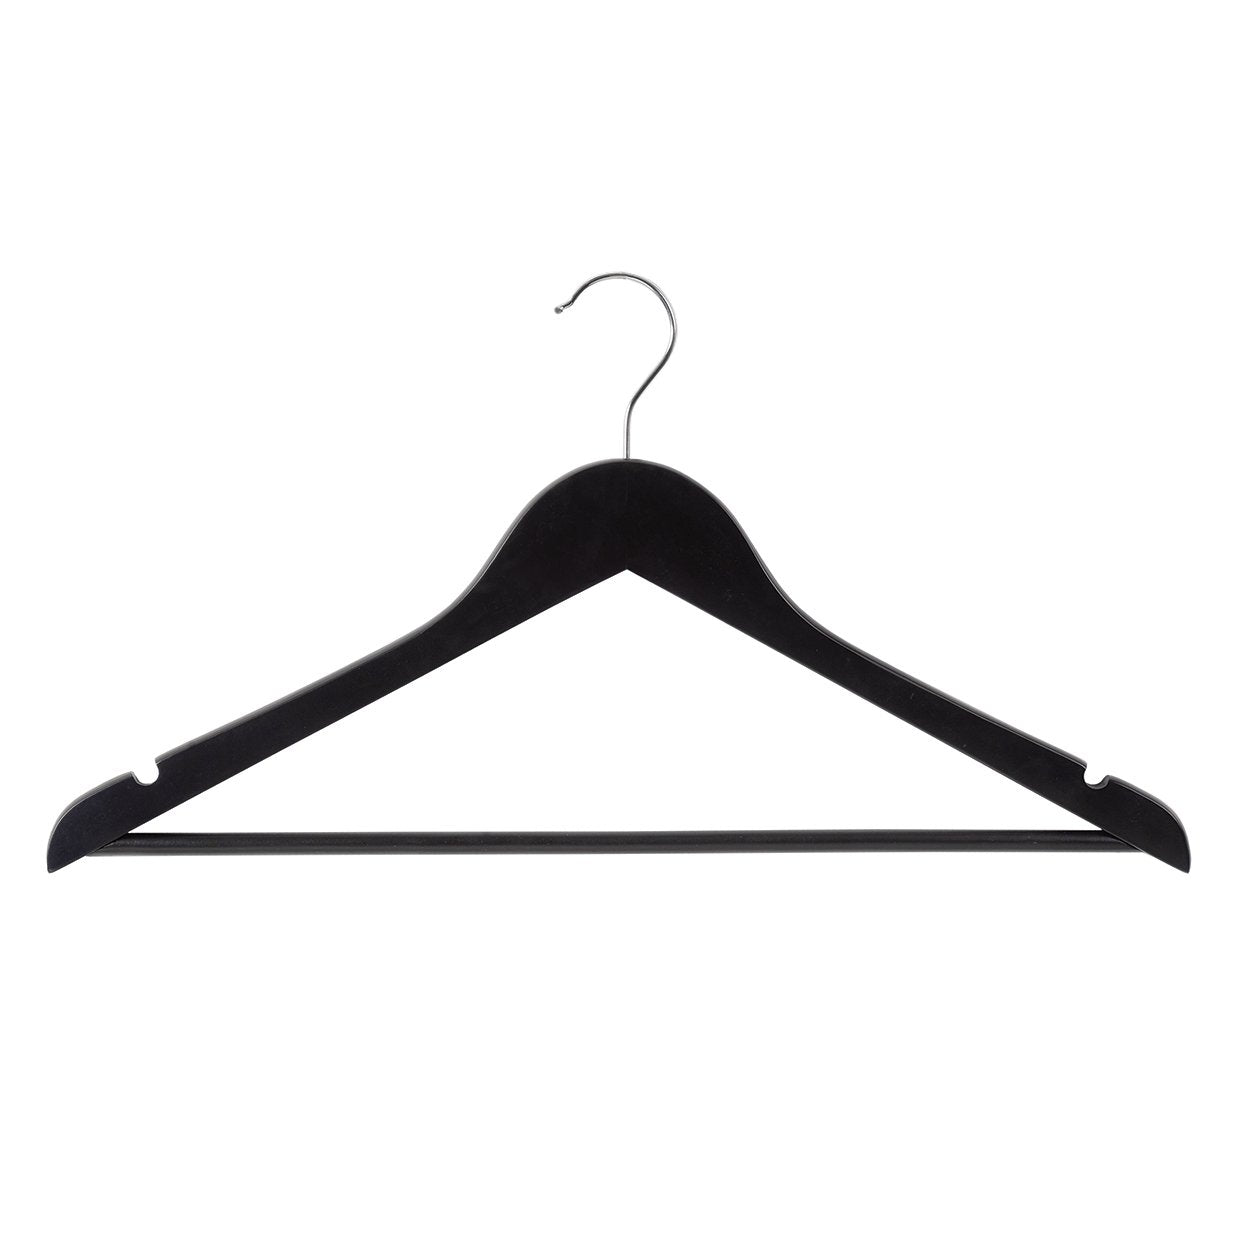 Wooden Hanger Slimline with Notches and Rails (H2640)